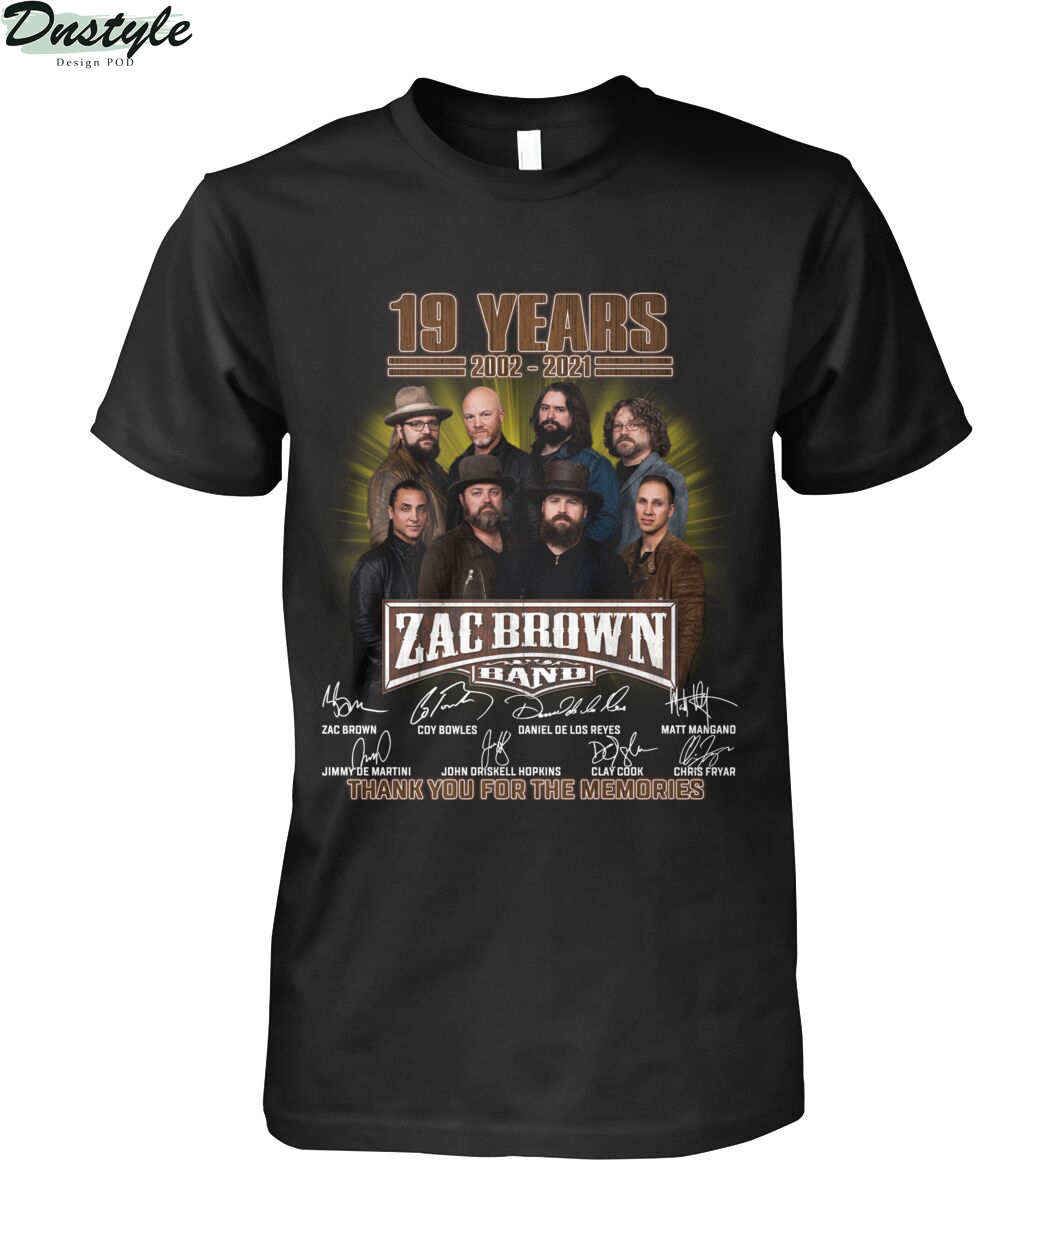 Zac Brown band 19 years 2002 2021 signature thank you for the memories shirt